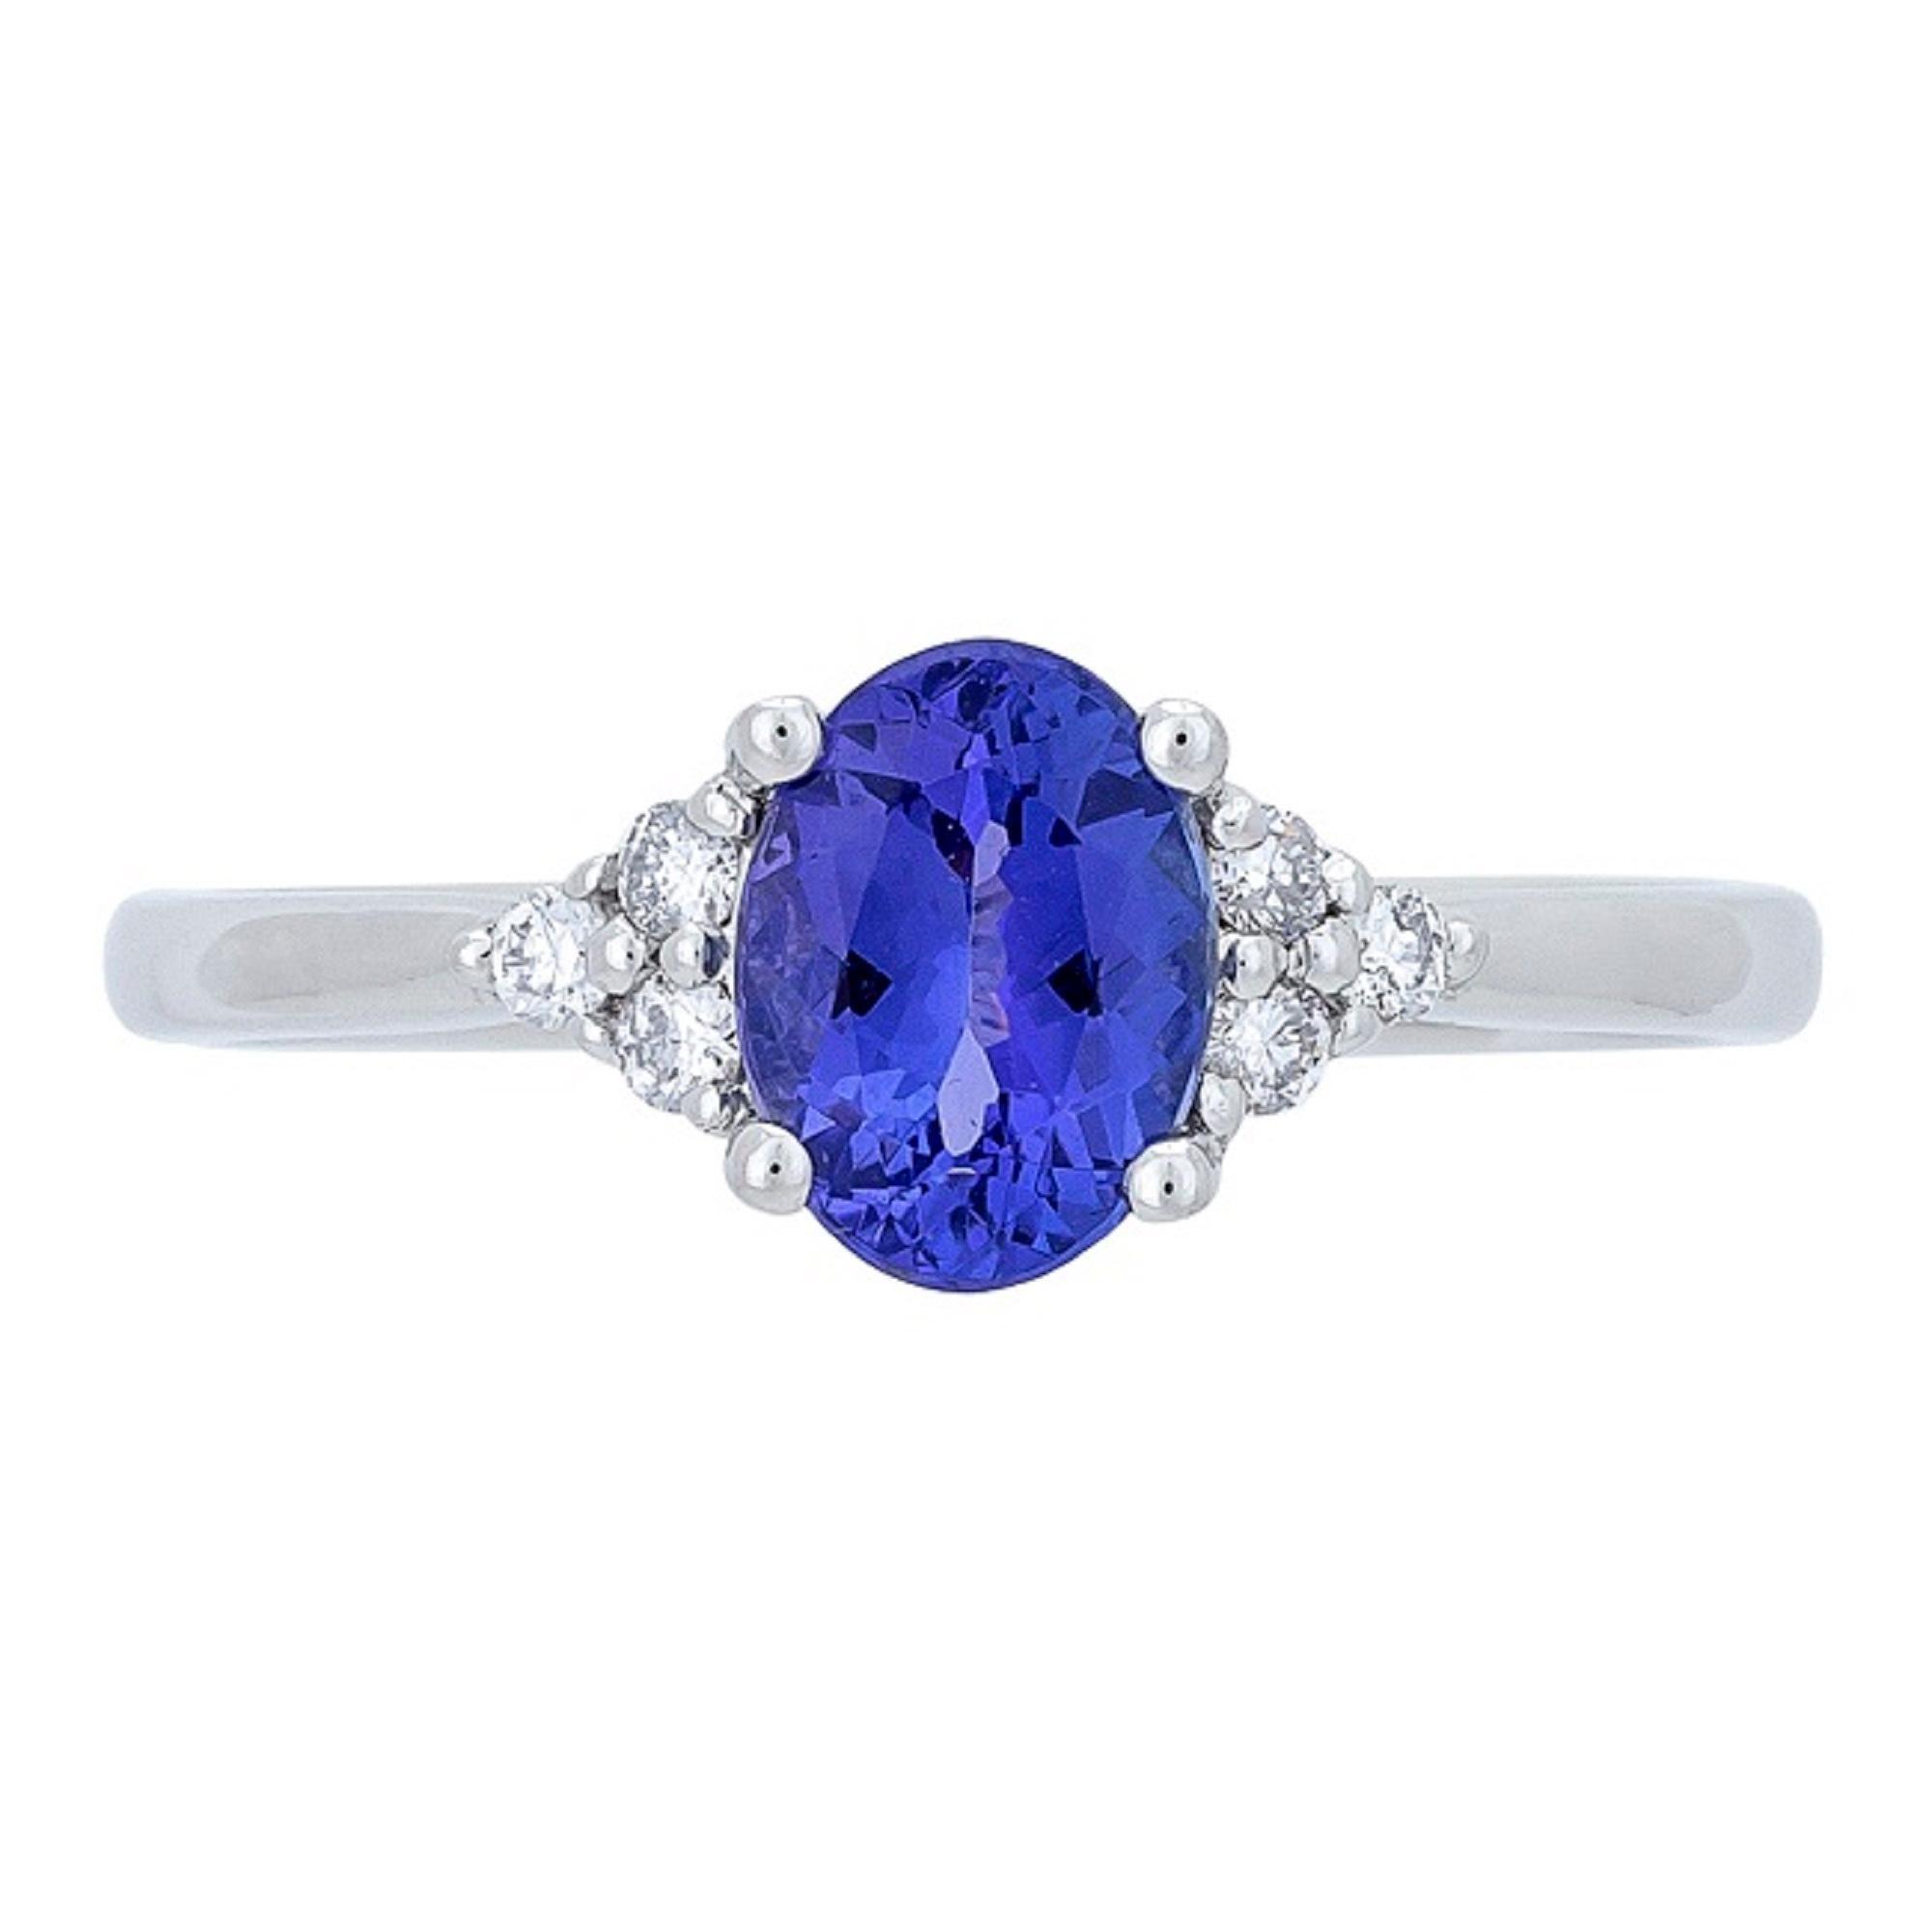 1.02 Carat Oval Cut Tanzanite Diamond Accents 14K White Gold Engagement Ring In New Condition For Sale In New York, NY